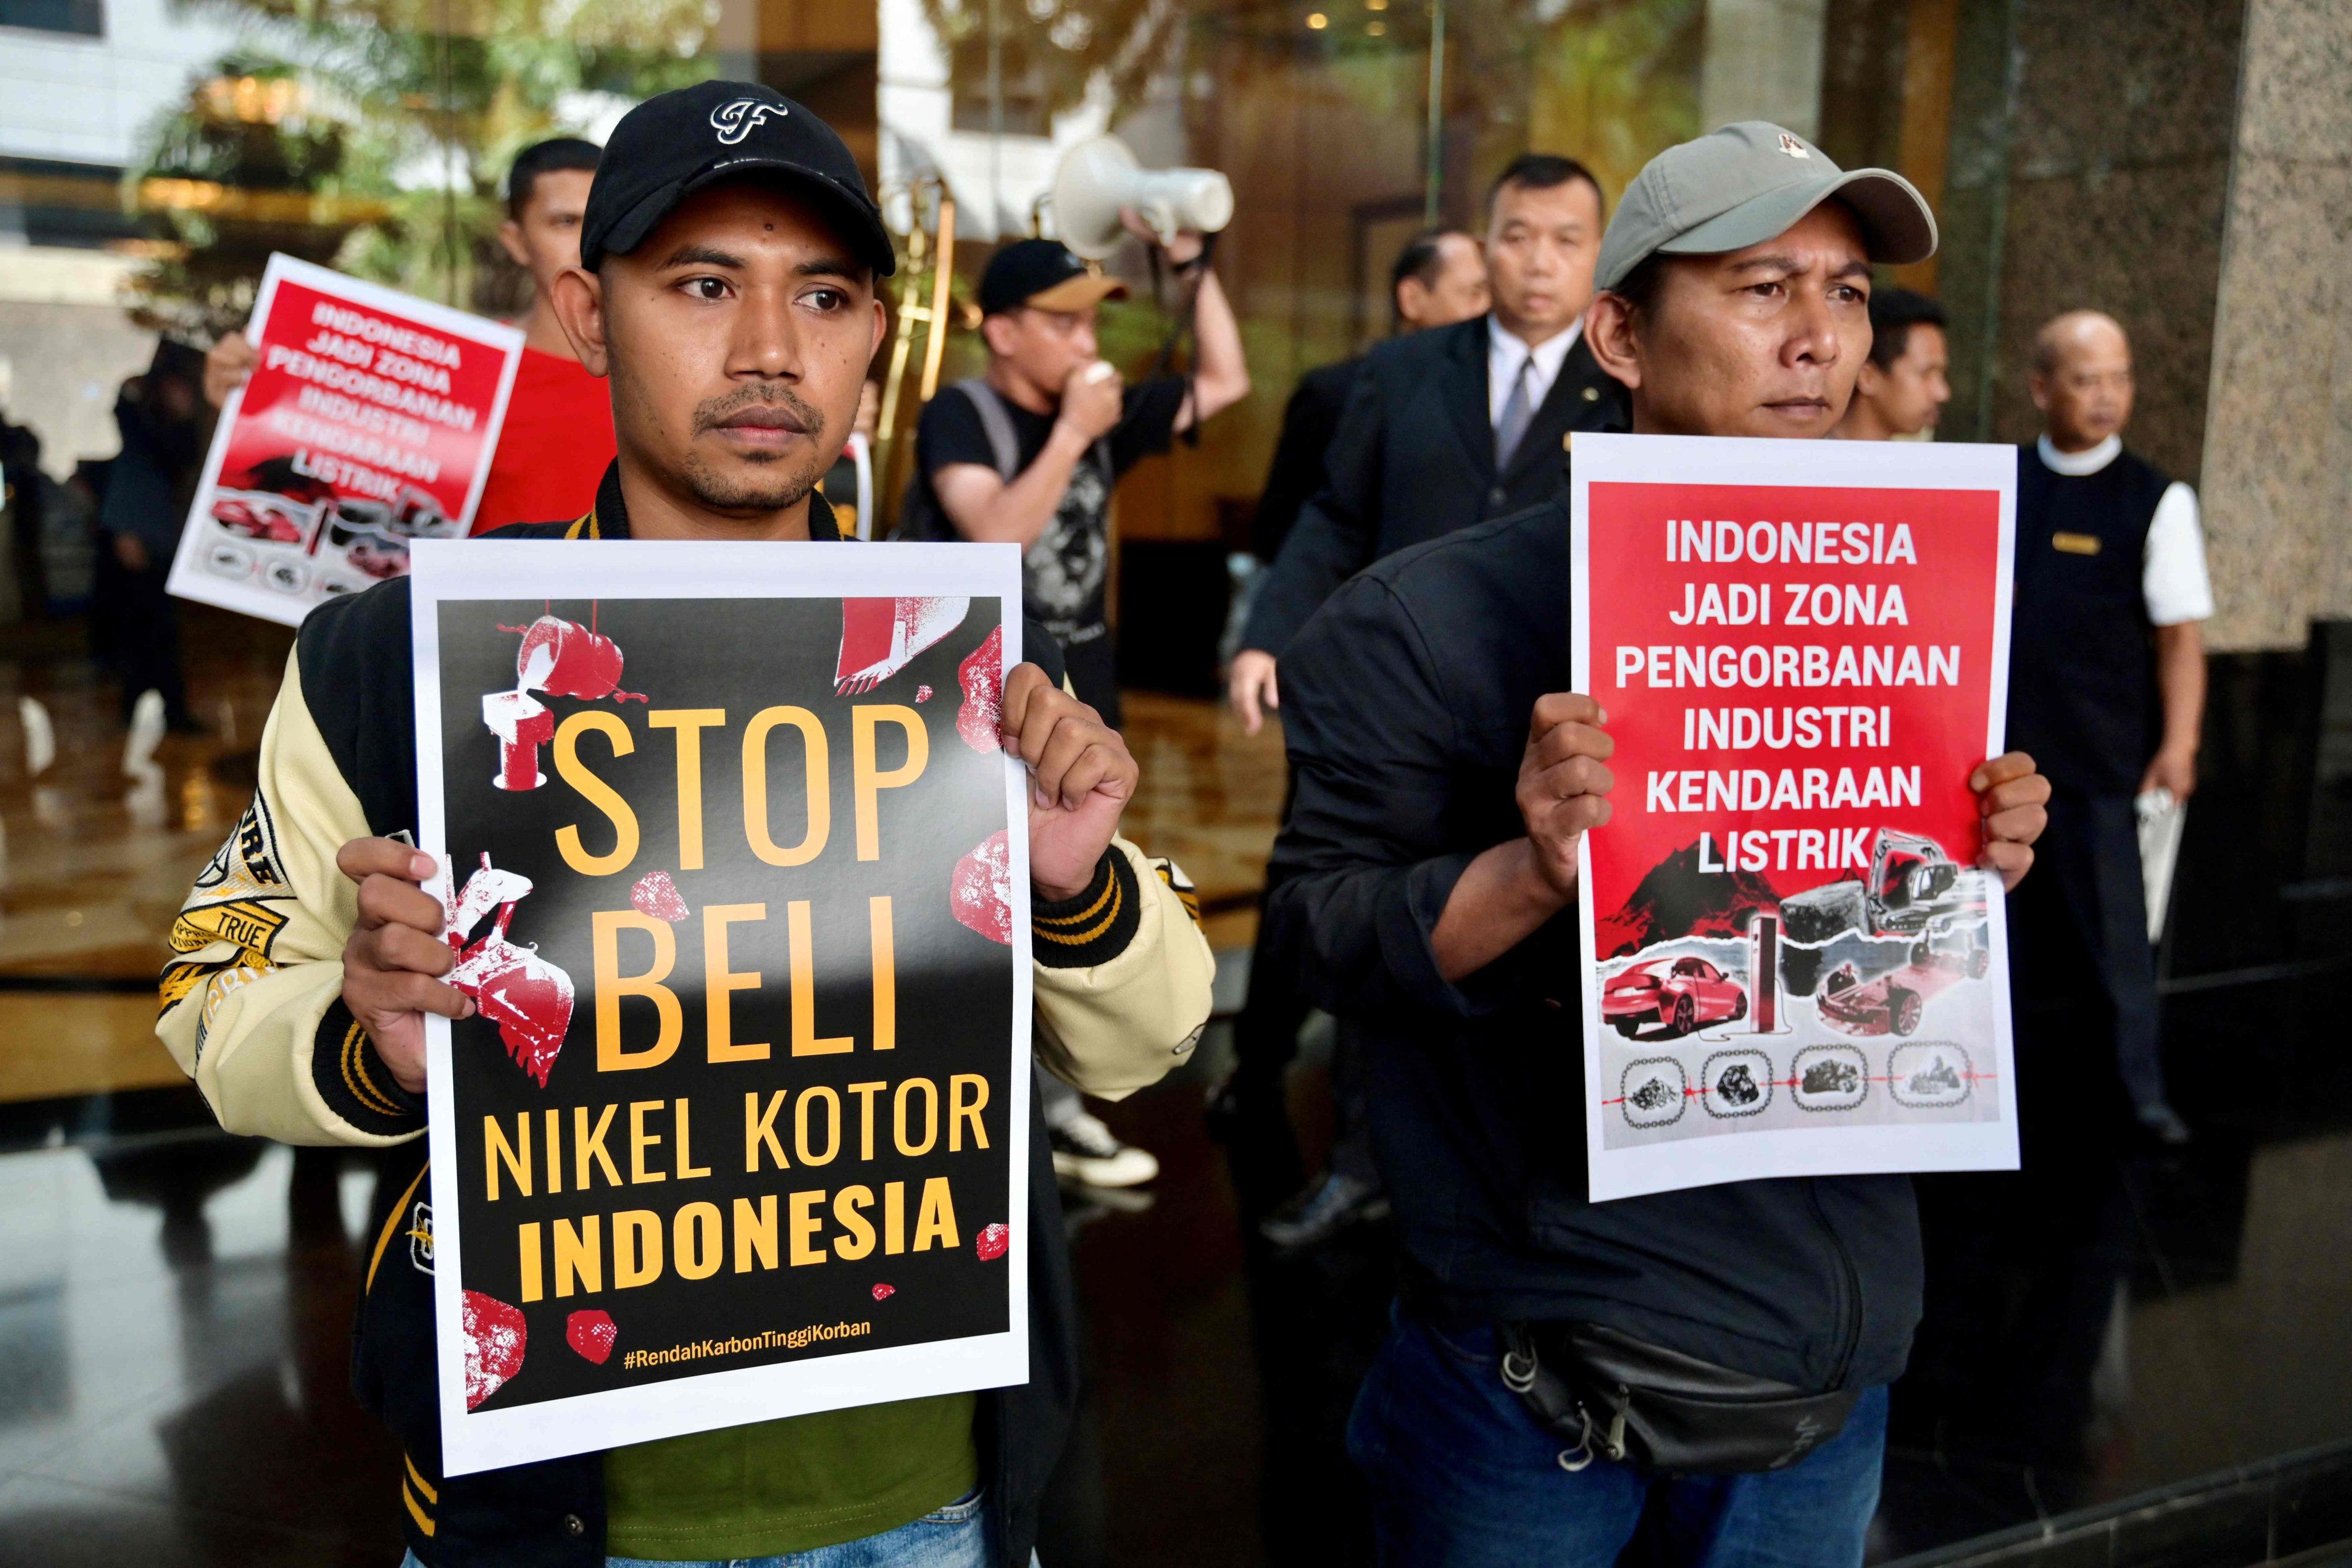 Environmental activists hold posters that say “stop buying Indonesia’s dirty nickel” and “Indonesia has become a sacrifice zone for the electric vehicle industry”, at a critical minerals conference venue in Jakarta. Photo: AFP